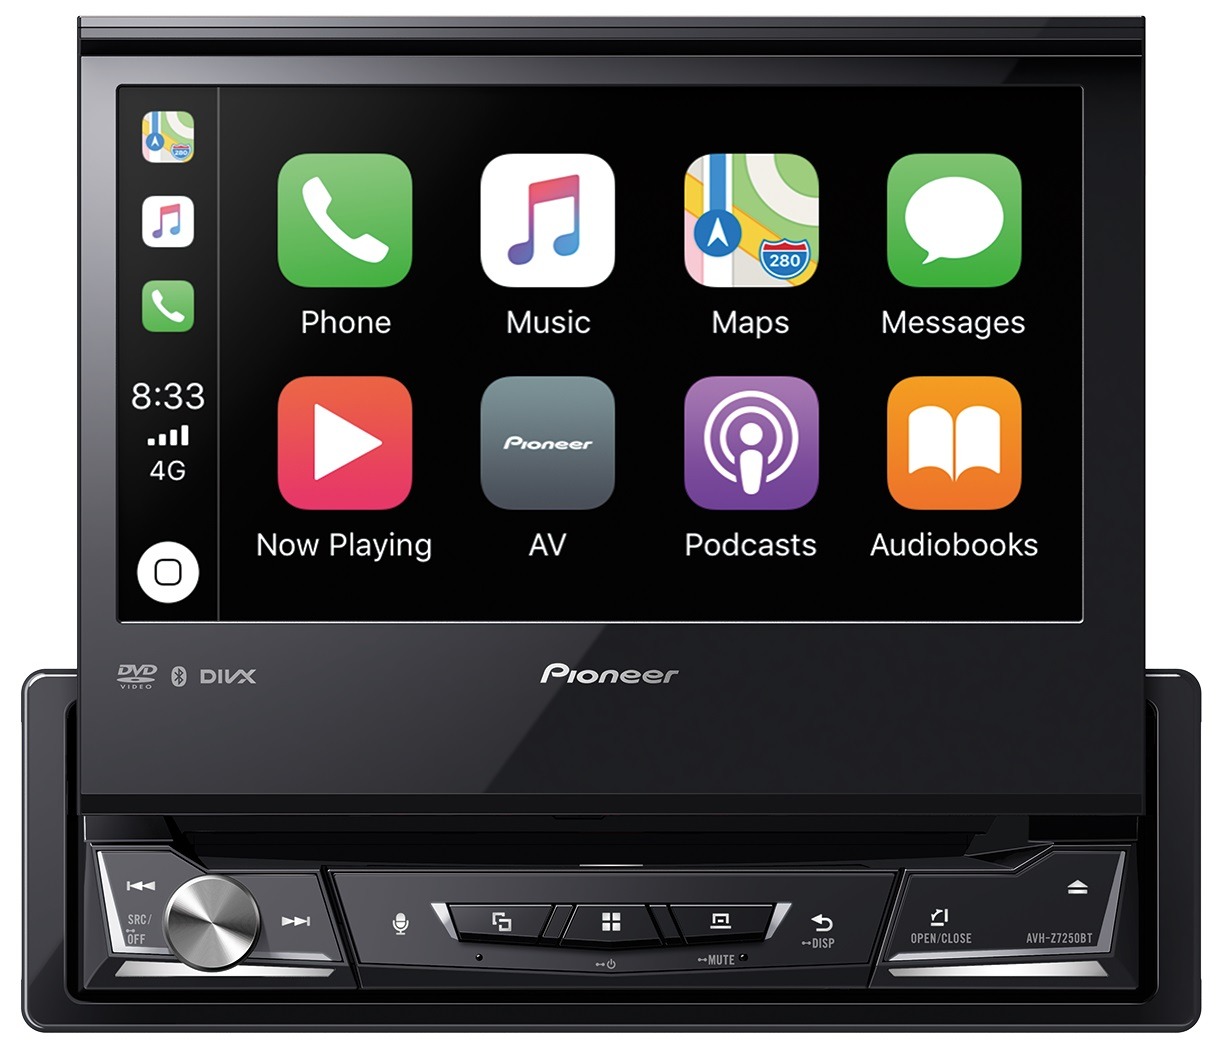 Pioneer AVH-Z7250BT In-Dash 1-DIN DVD Multimedia AV Receiver with 7″ Touchscreen Display, Apple CarPlay, Android Auto, WebLink, Built-in Bluetooth and Full HD Video Playback from USB Device